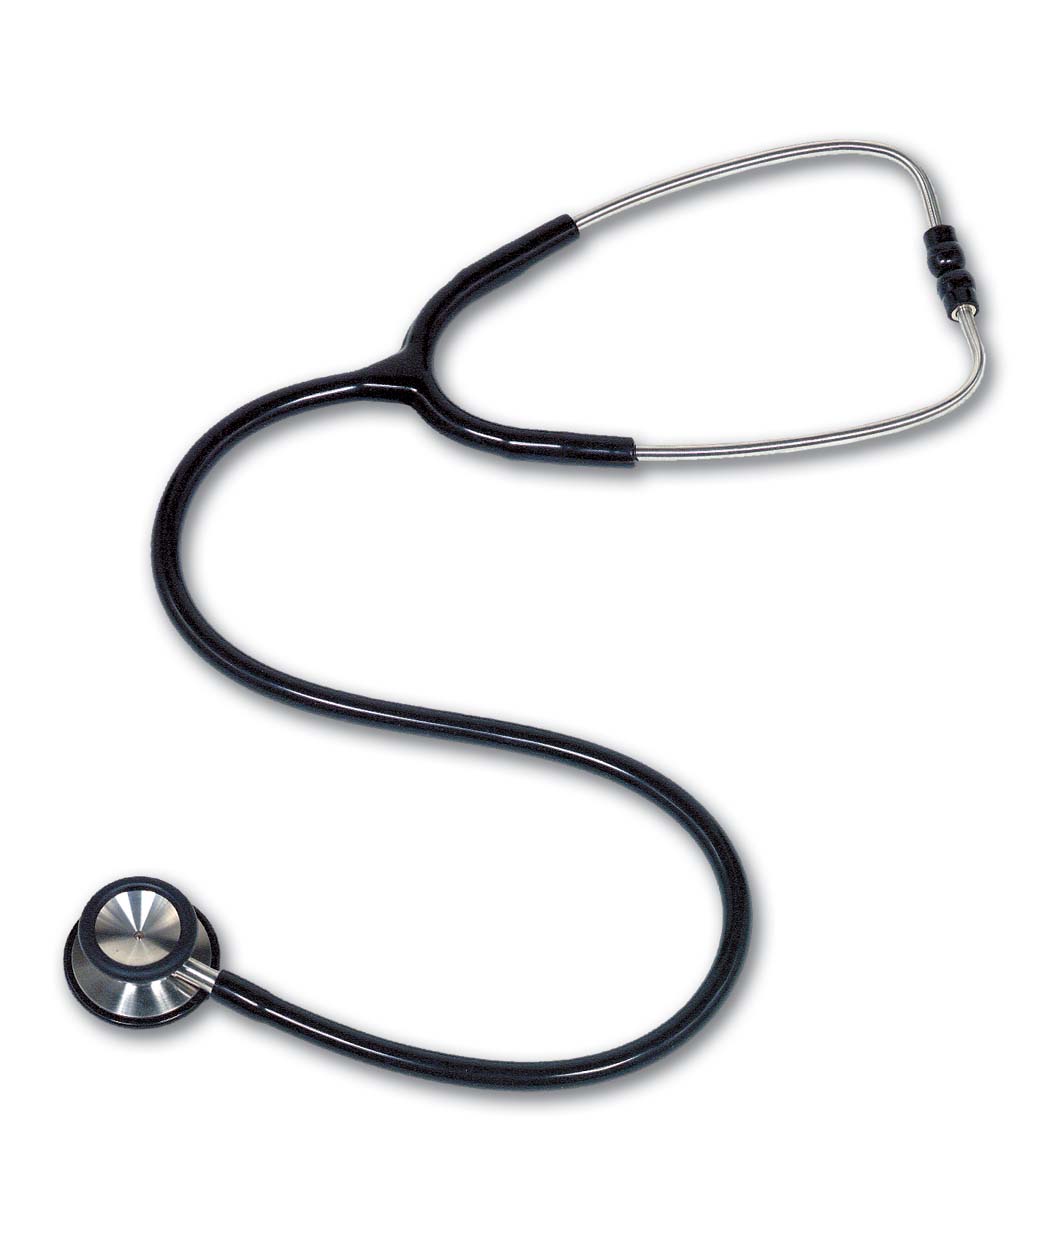 Stethoscope clipart 9